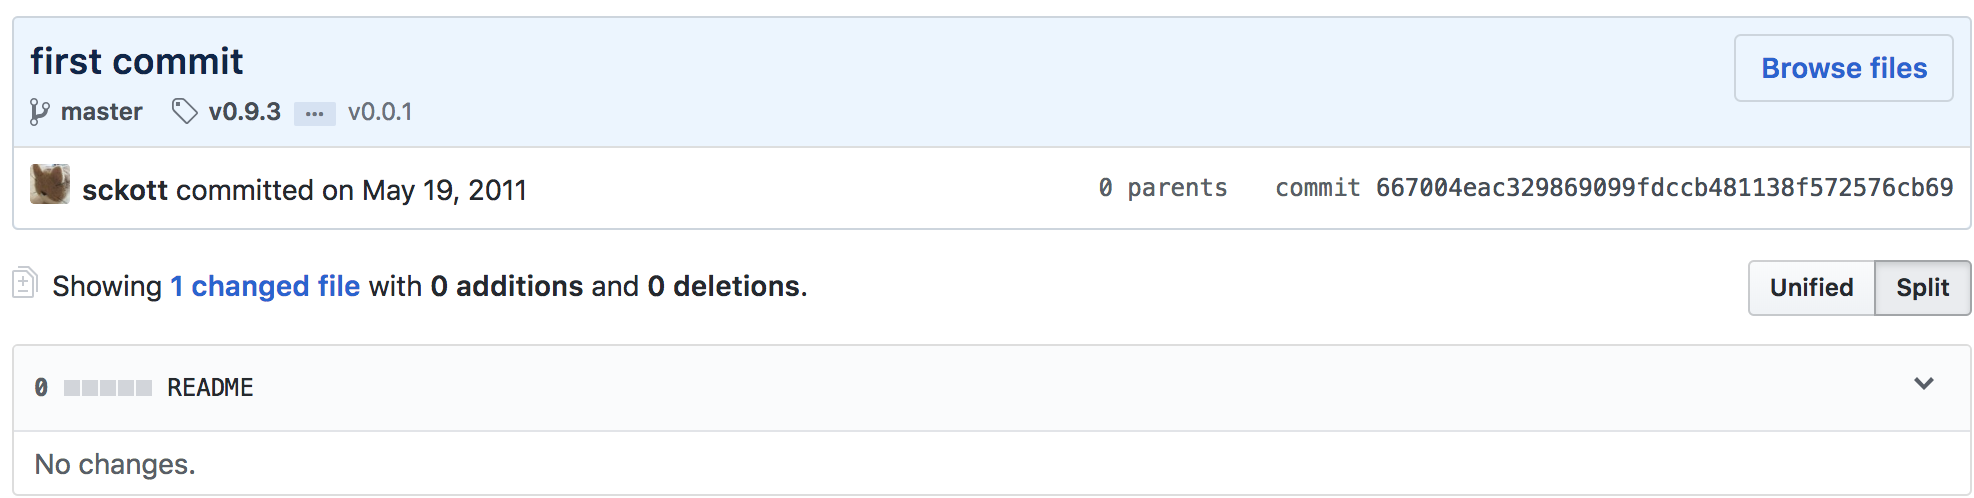 screenshot of the first commit